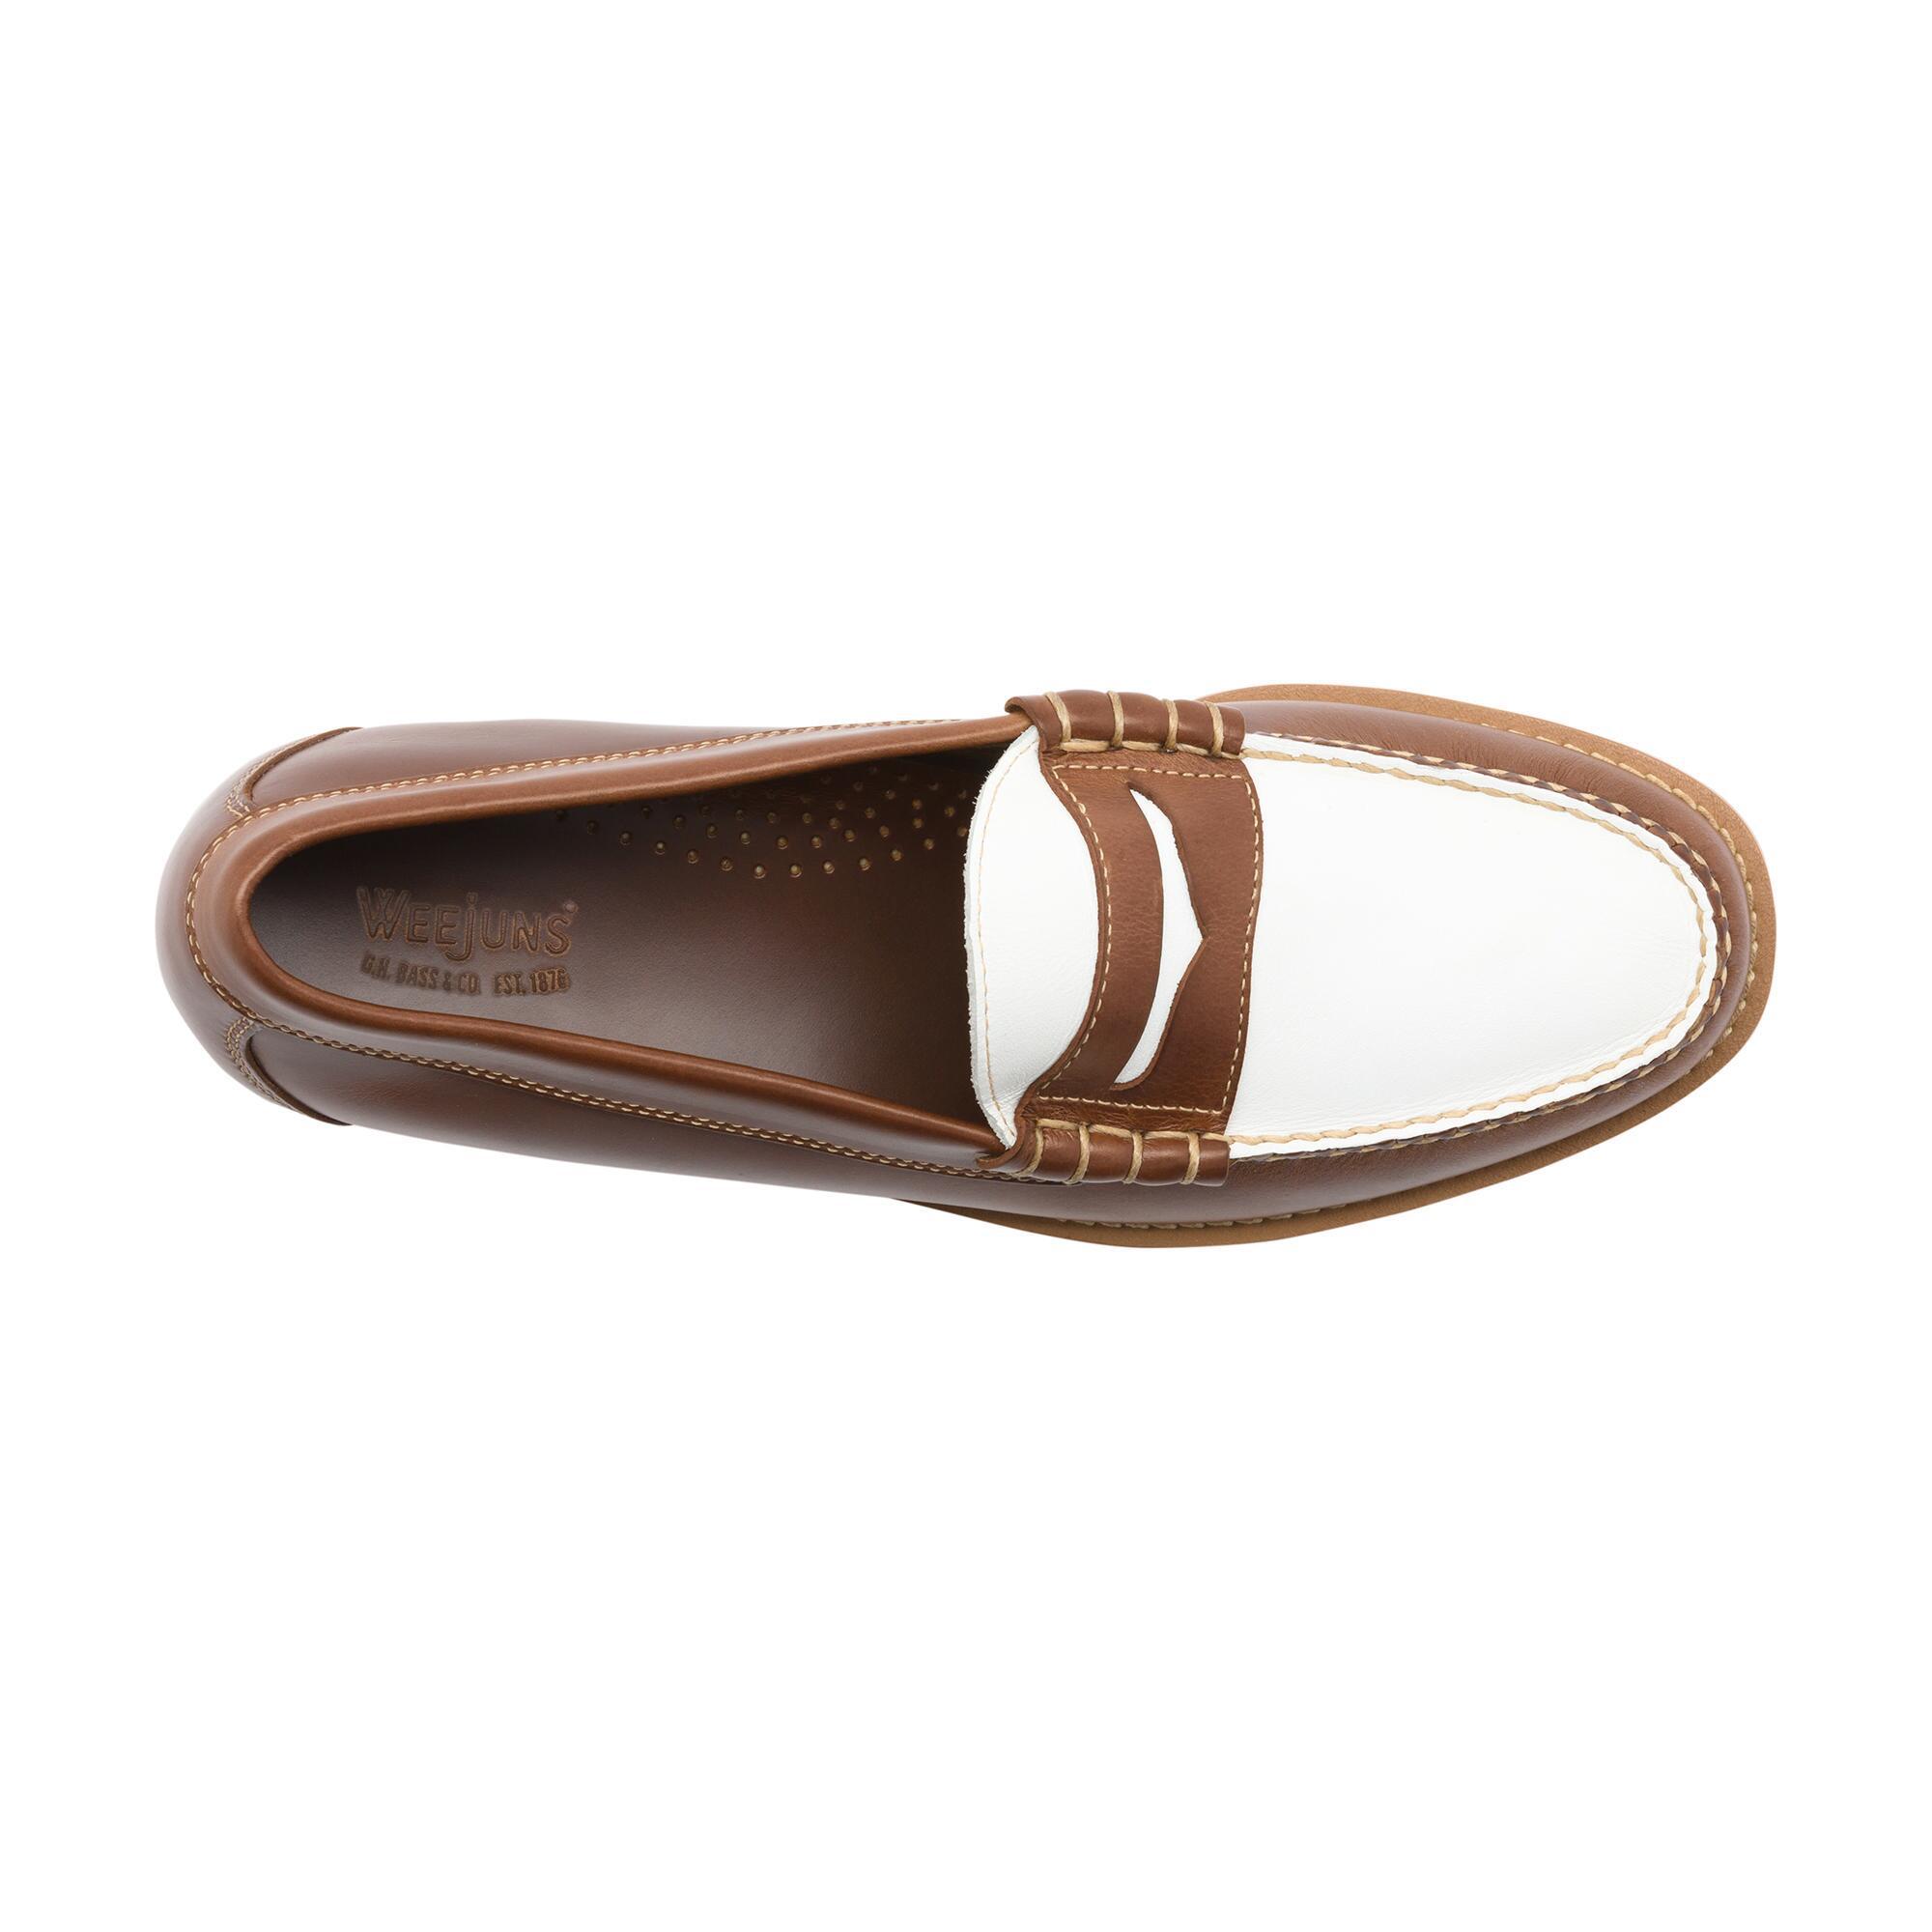 larson natural sole weejuns